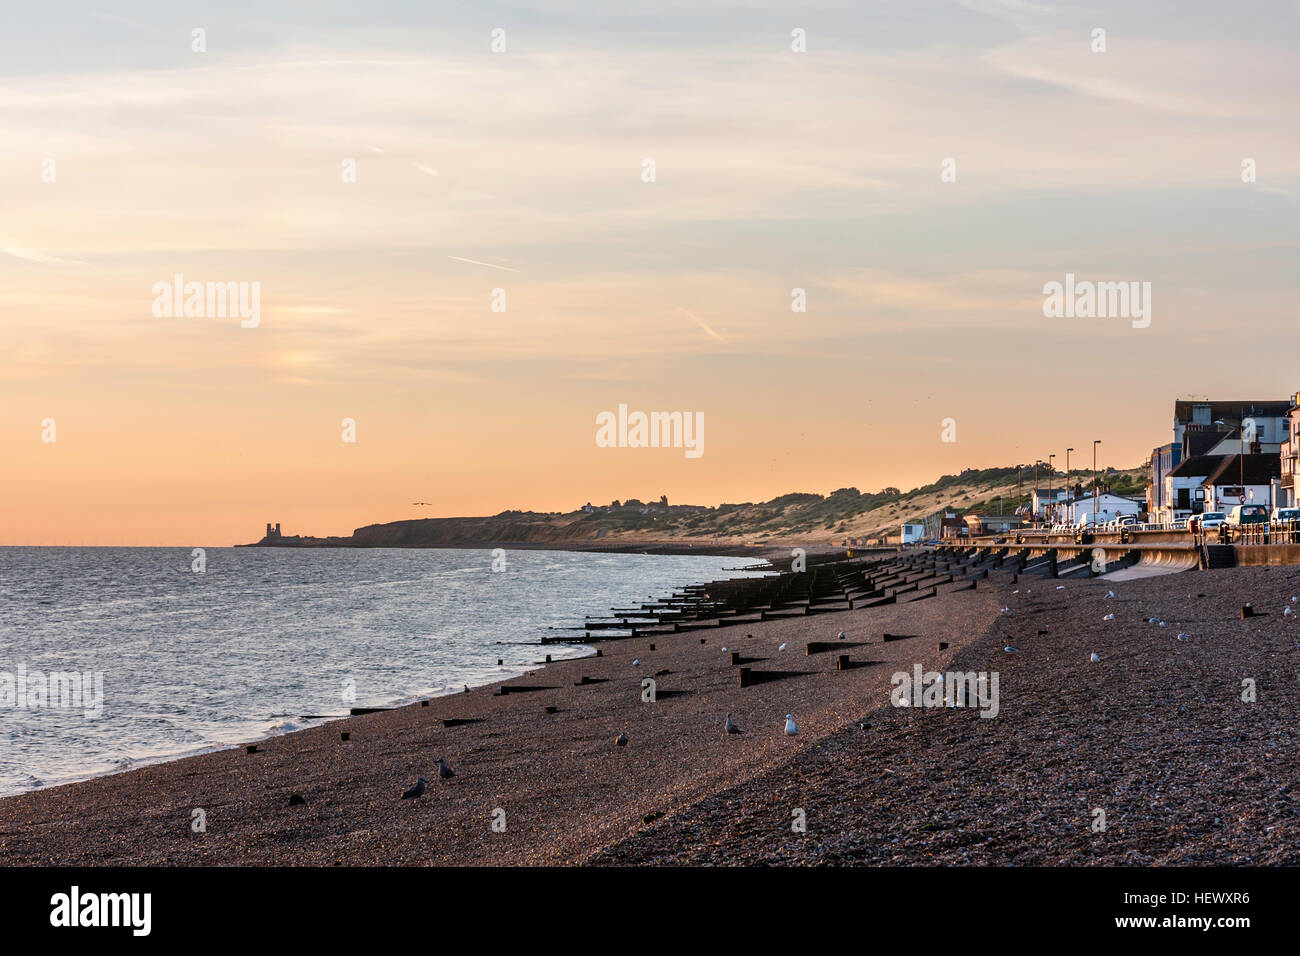 View along shingle beach with rows of wooden wave breakers, seafront promenade and town during Dawn. In distance, headland at Reculver. Stock Photo